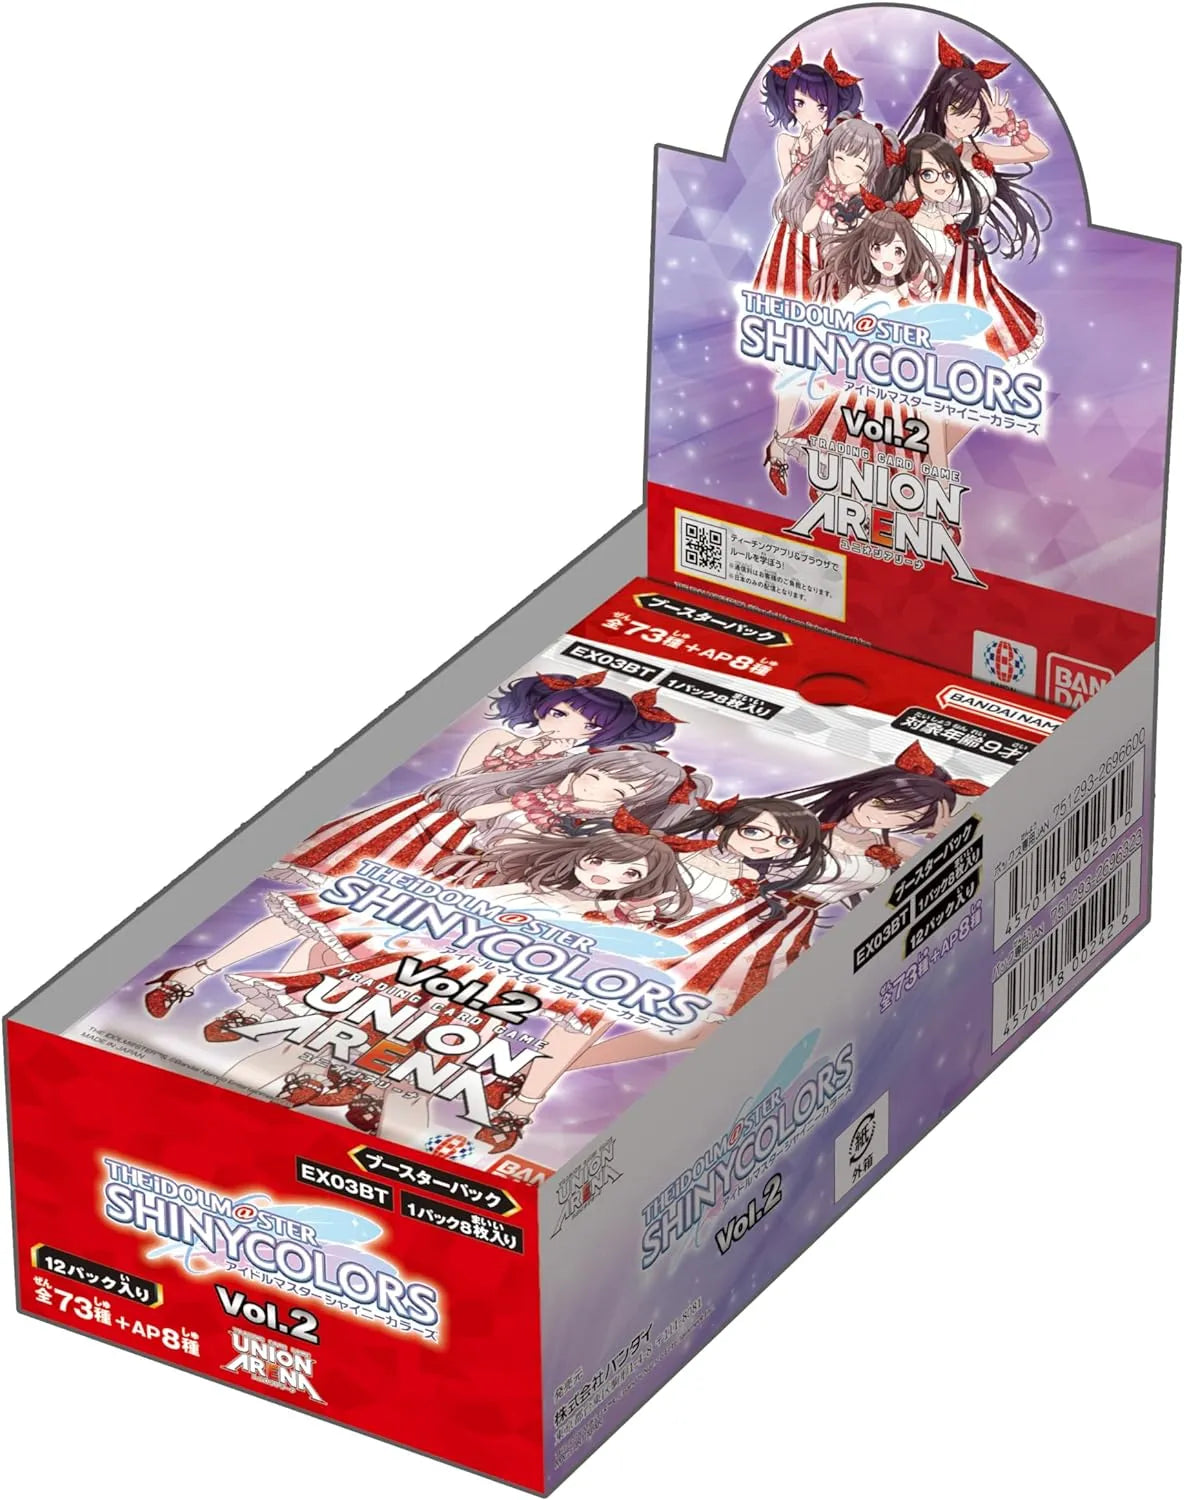 Union Arena TCG -The Idolmaster Shiny Colors Vol.2 EX03BT (Japanese) Booster Box